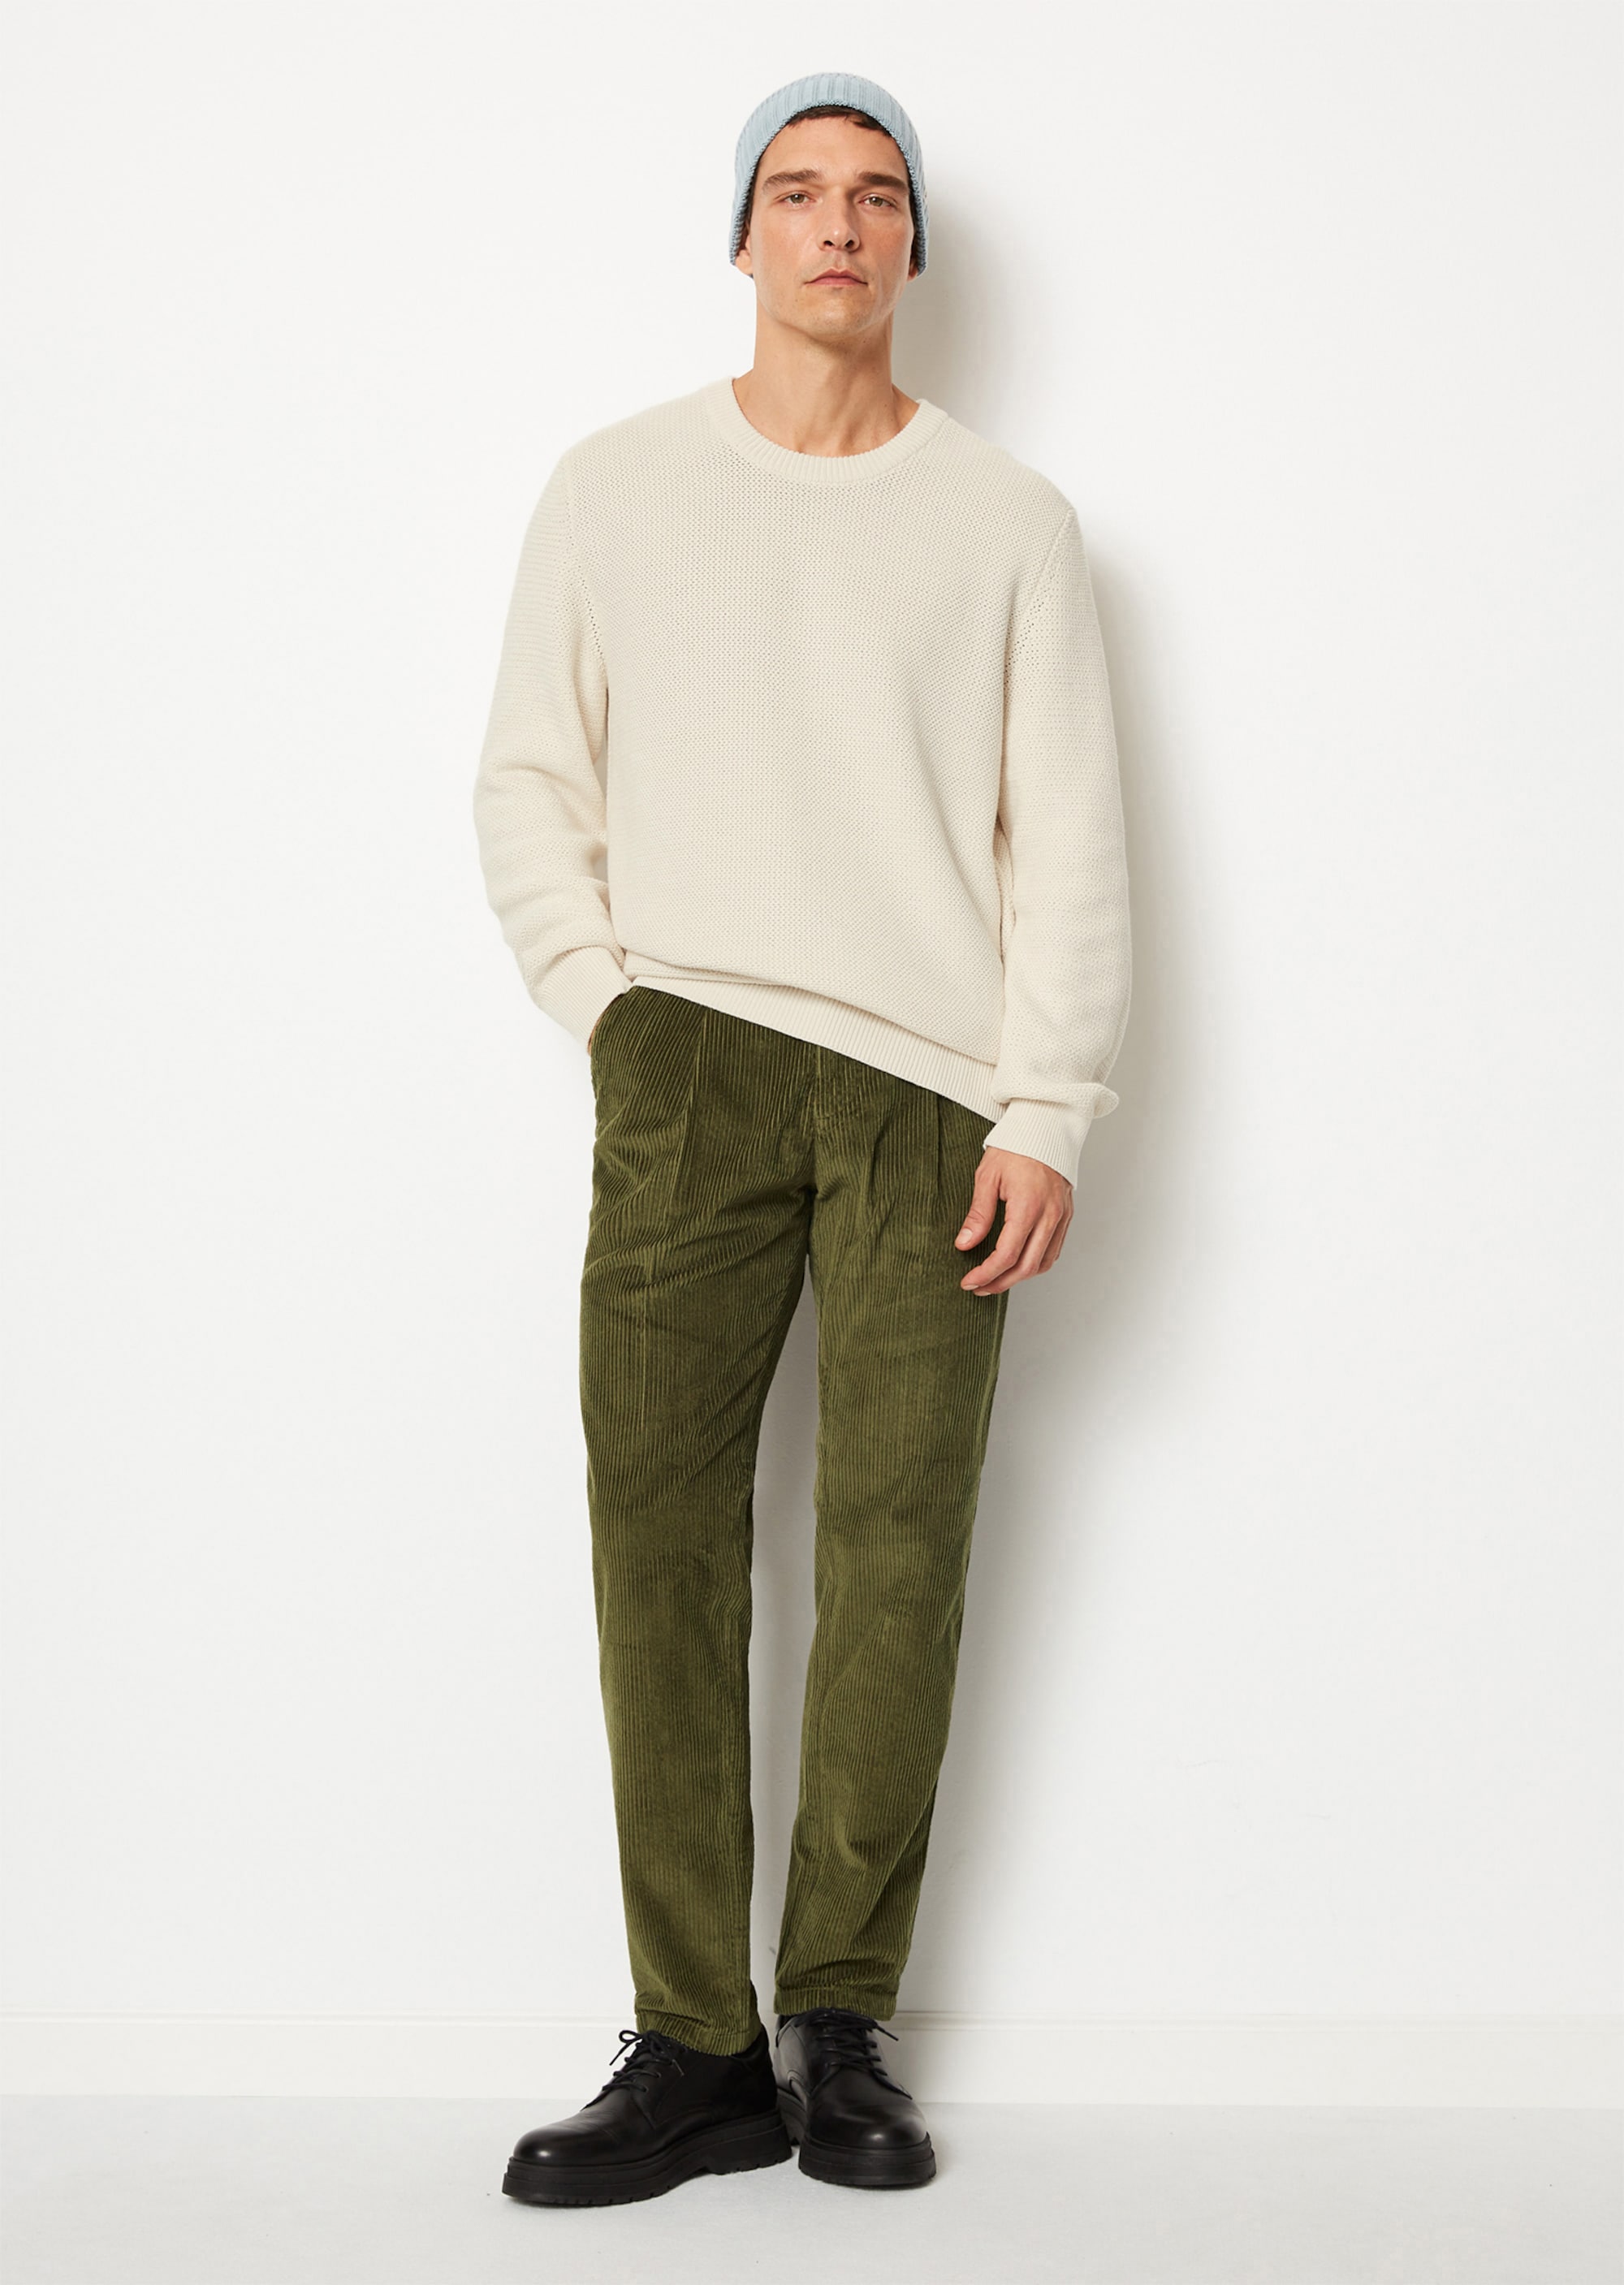 Corduroy pants model OSBY jogger tapered made of pure organic